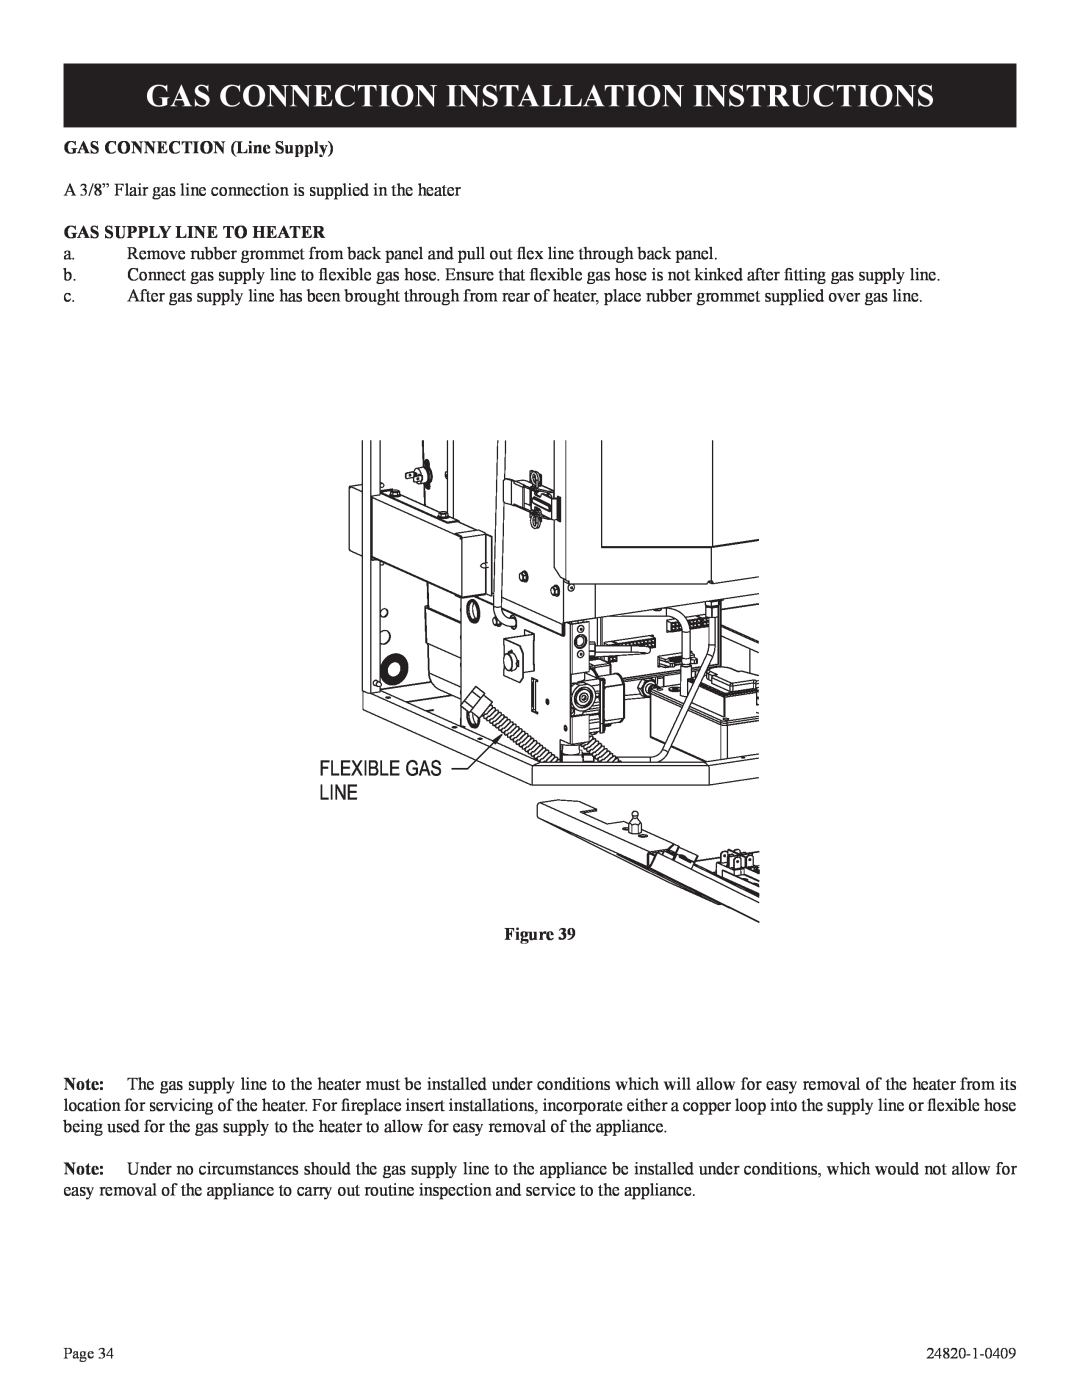 Empire Comfort Systems PV-28SV55-(C,G)2H(N,P)-1 Gas Connection Installation Instructions, Flexible Gas Line 